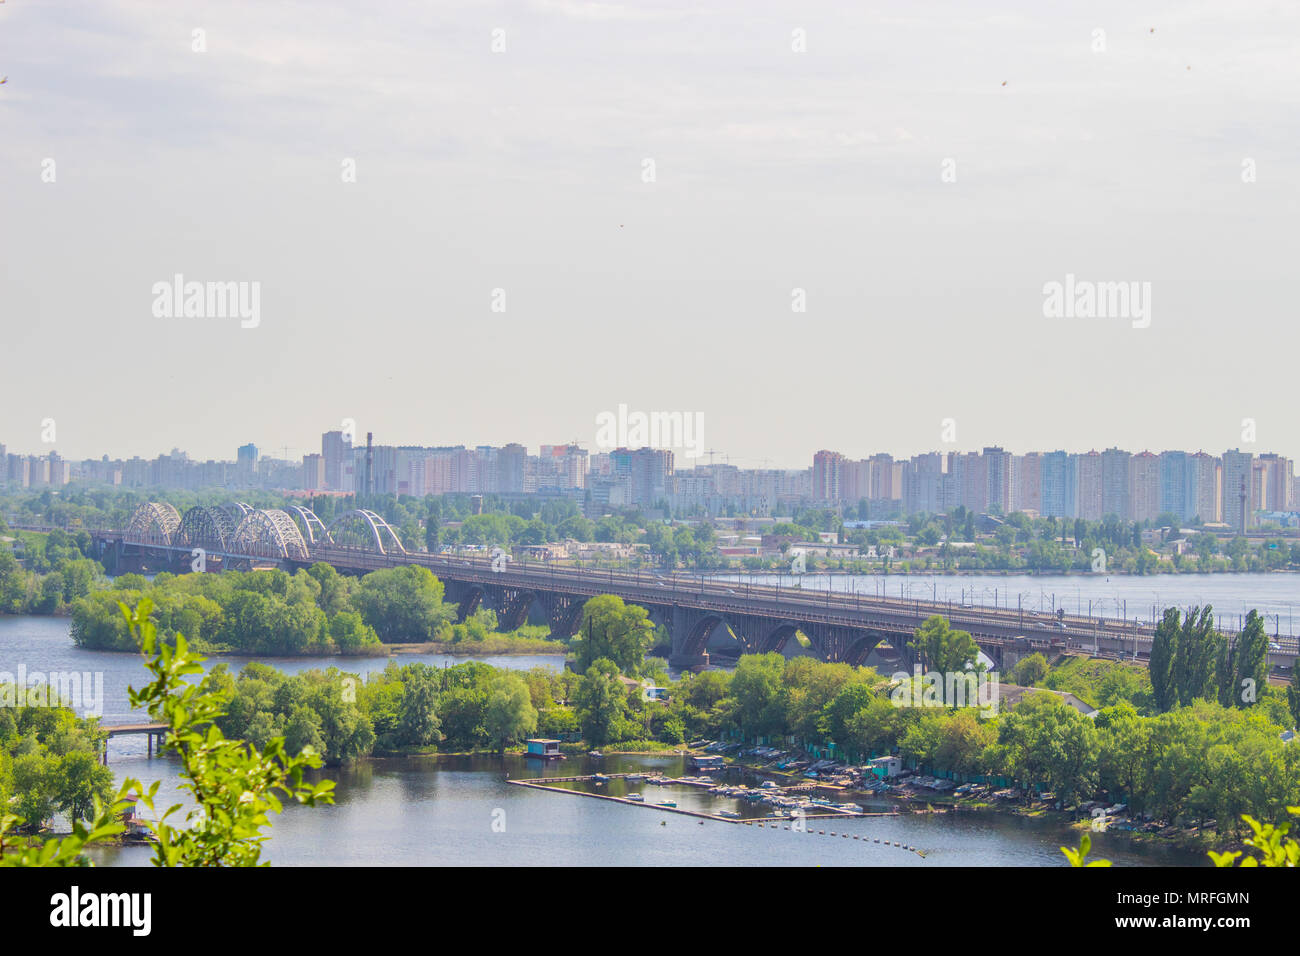 View of the city of Kiev from a height. City landscape. Overcast sky Stock Photo